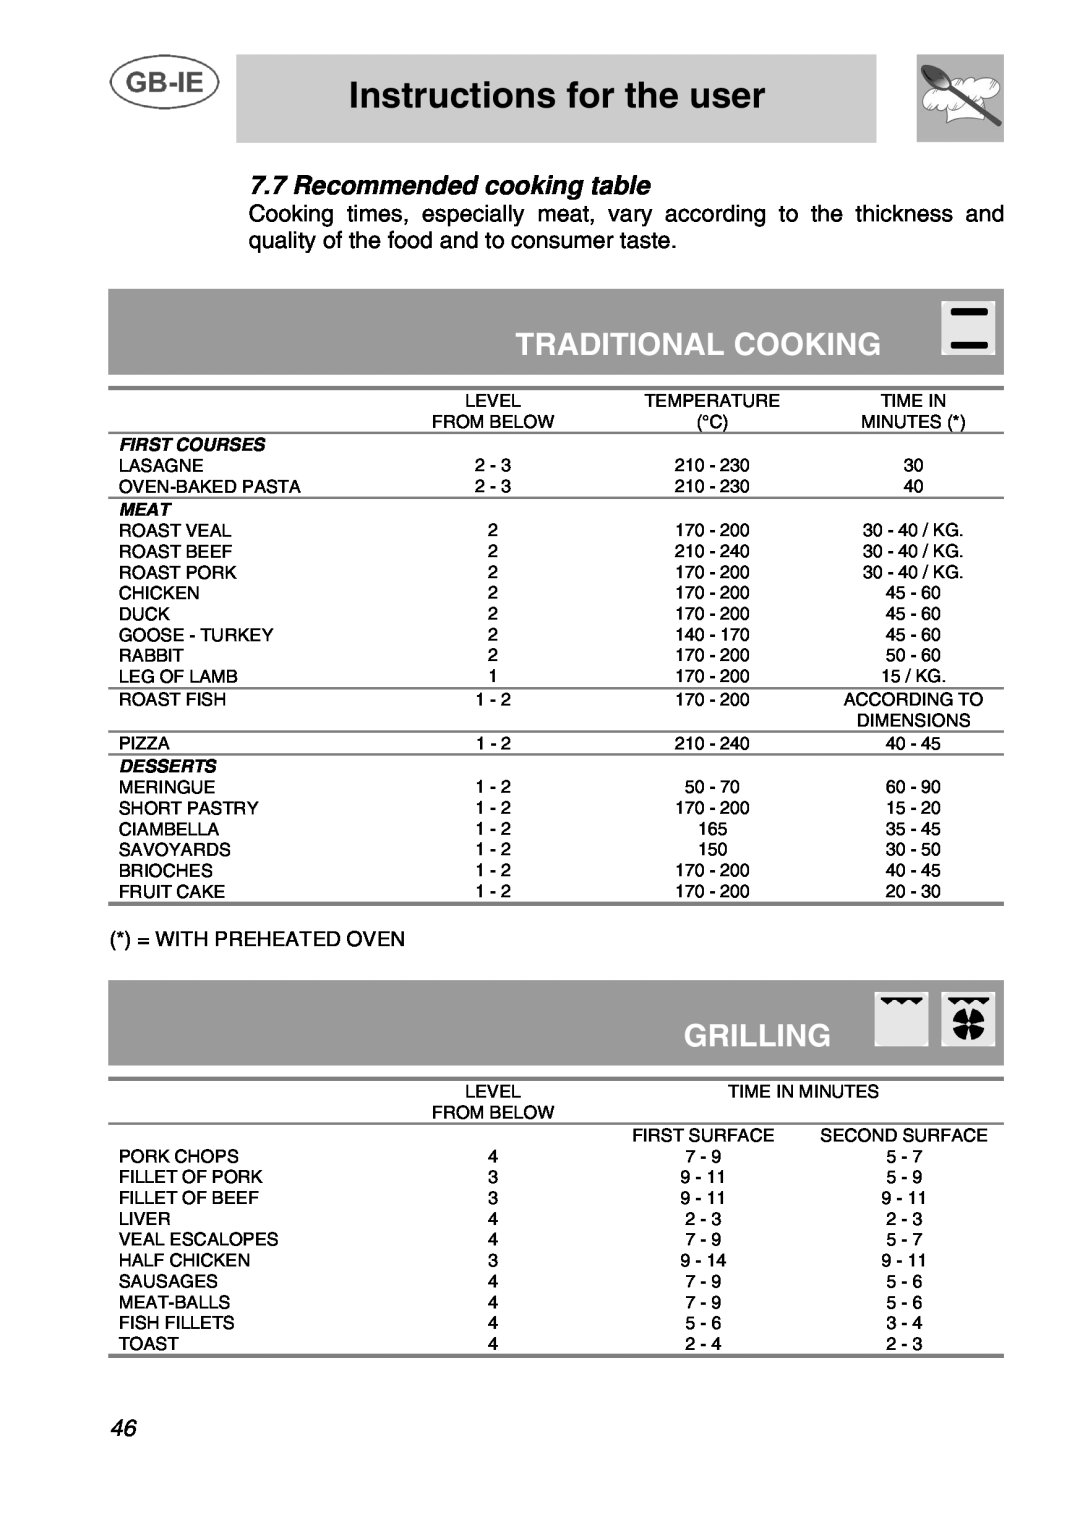 Smeg A1C manual Traditional Cooking, Grilling, Recommended cooking table, Instructions for the user, First Courses, Meat 